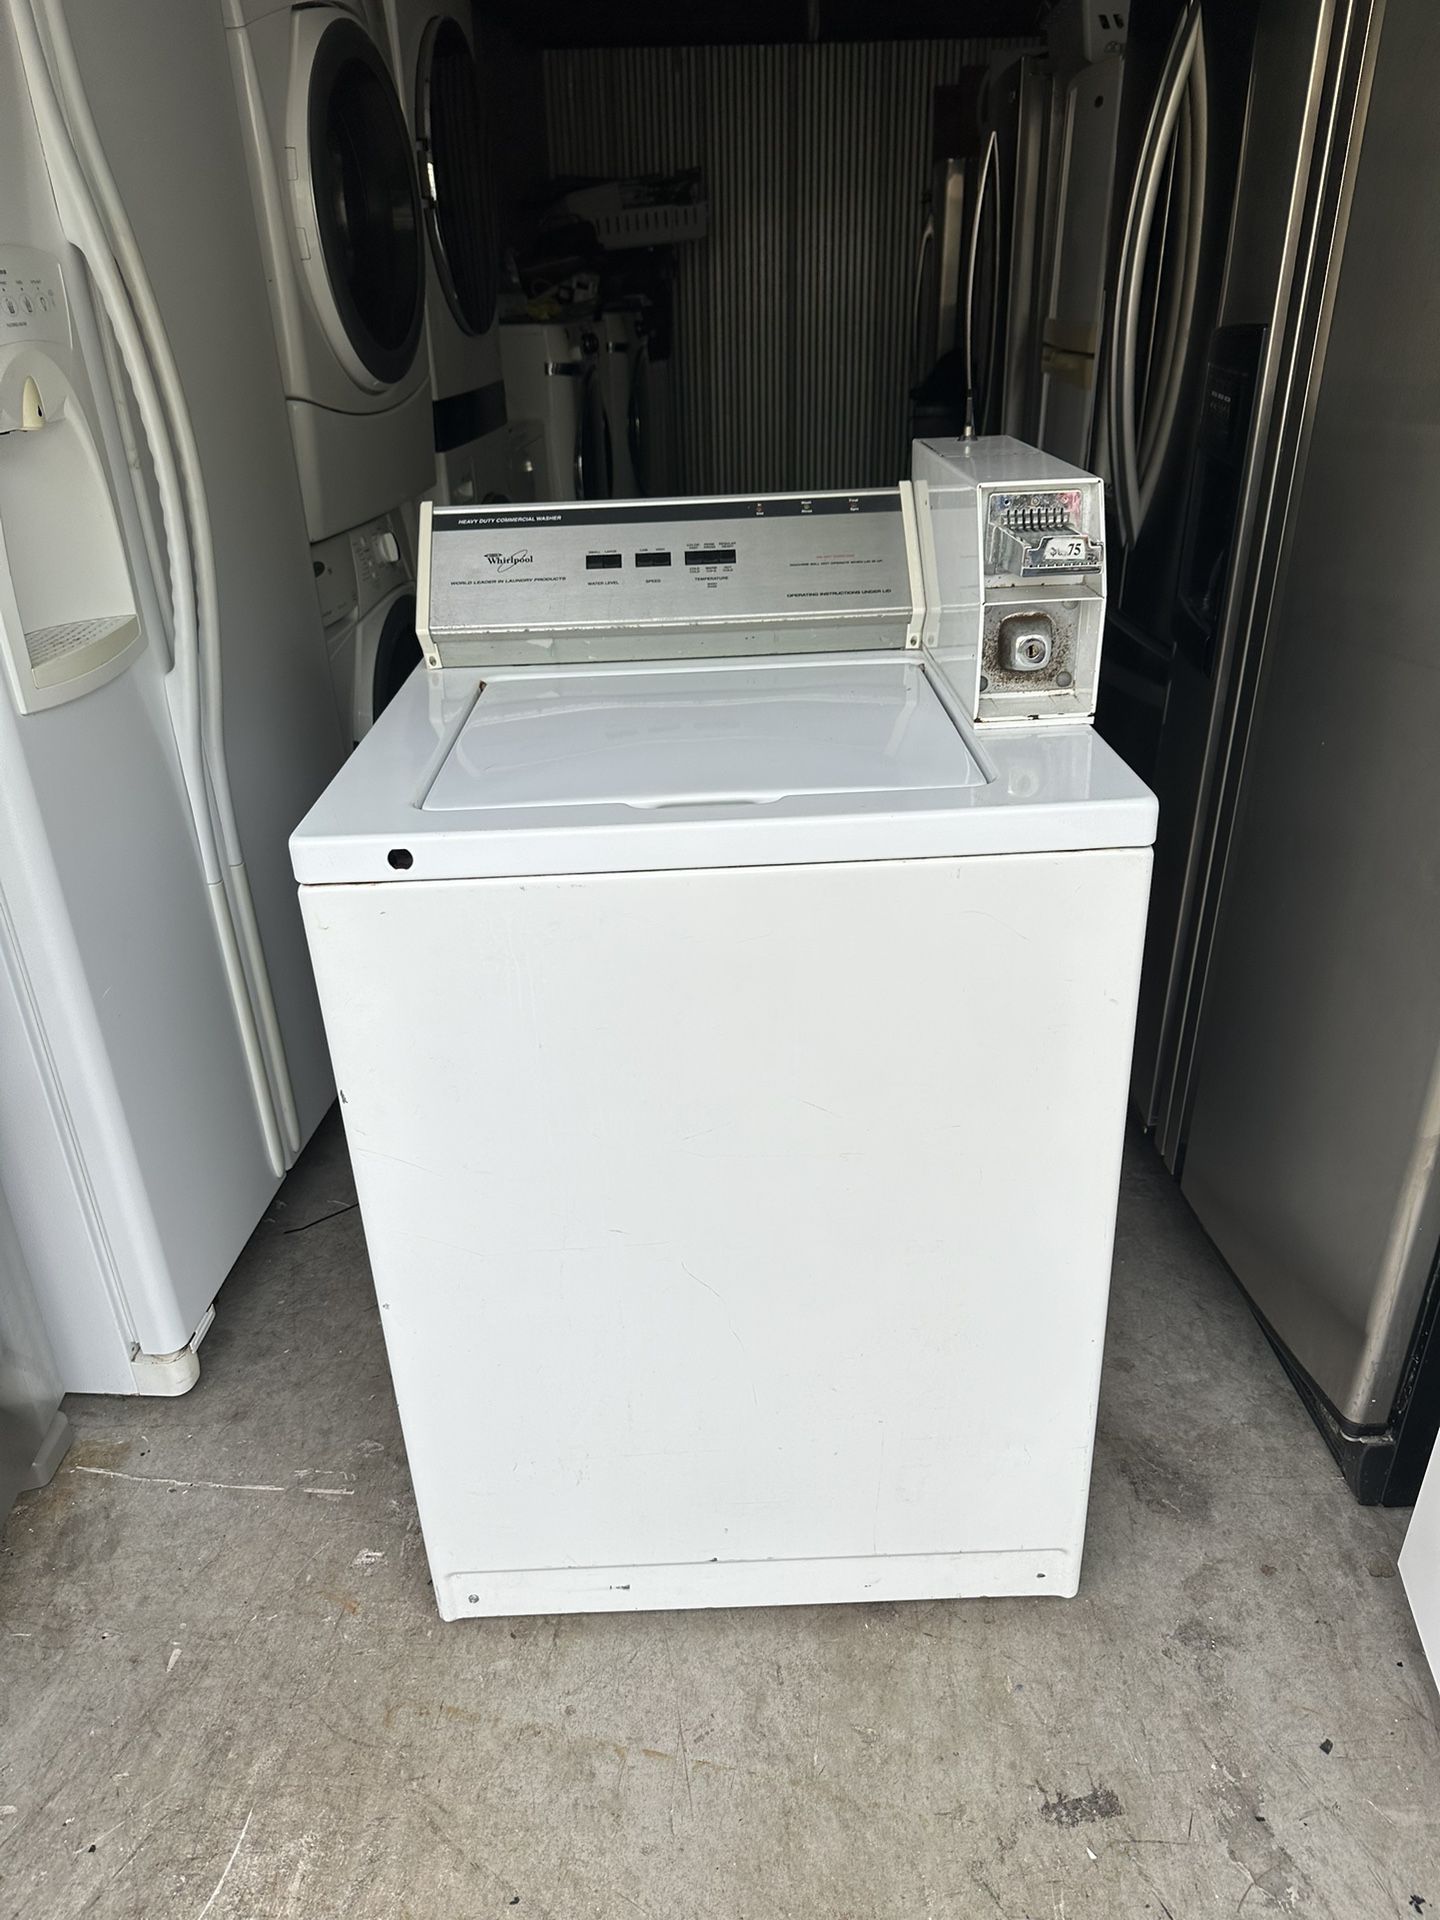 Whirlpool Washer Good Conditions Everything Works Fine 